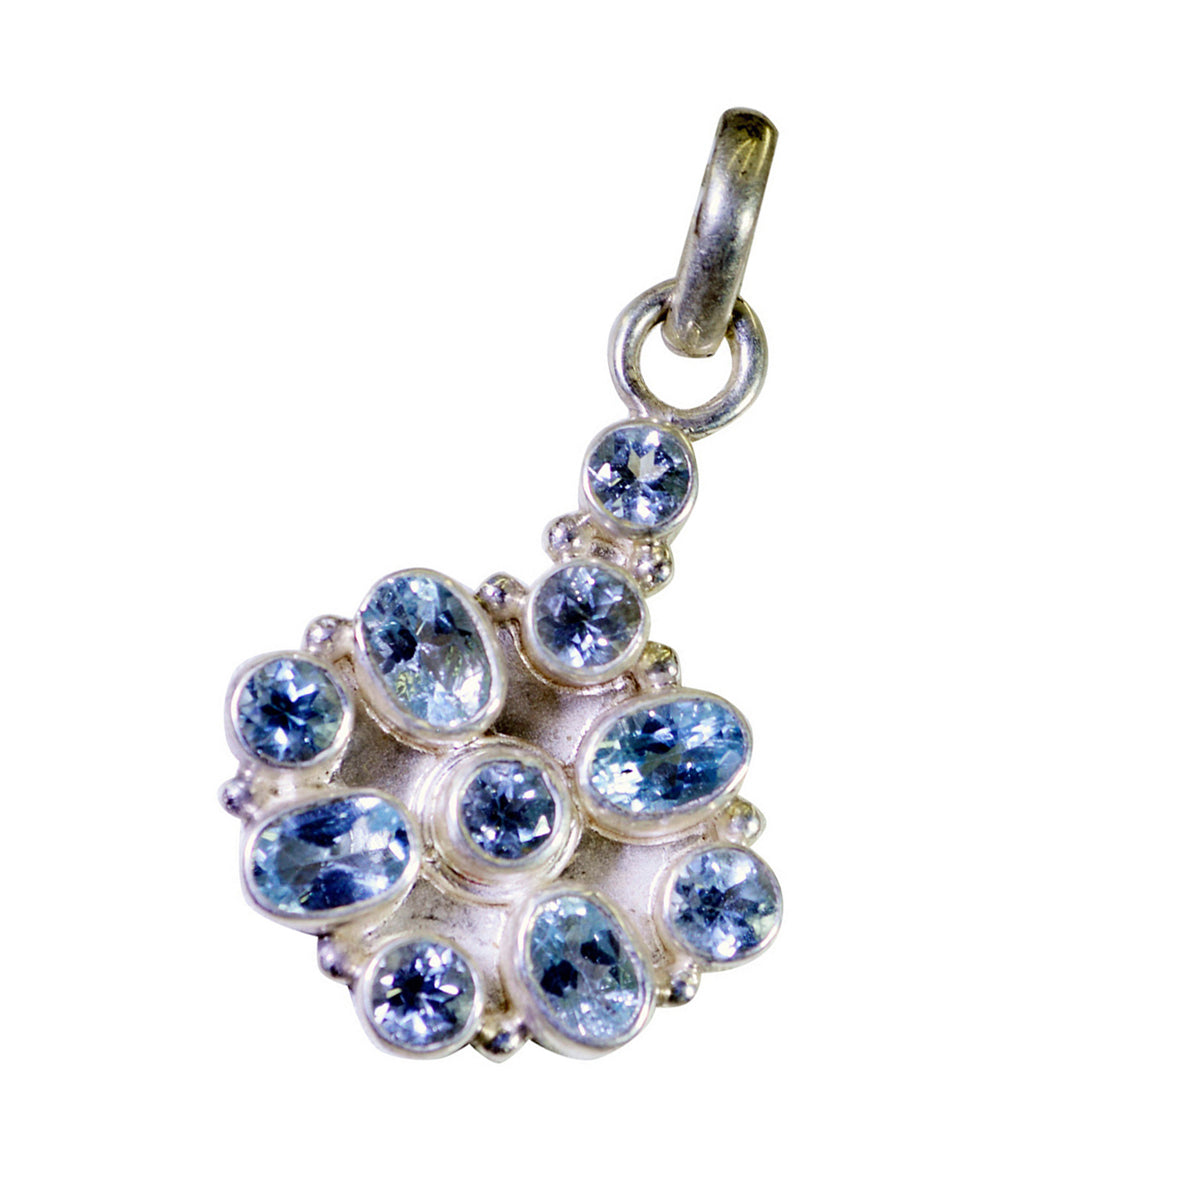 Riyo Comely Gems Multi Faceted Blue Blue Topaz Silver Pendant Gift For Wife